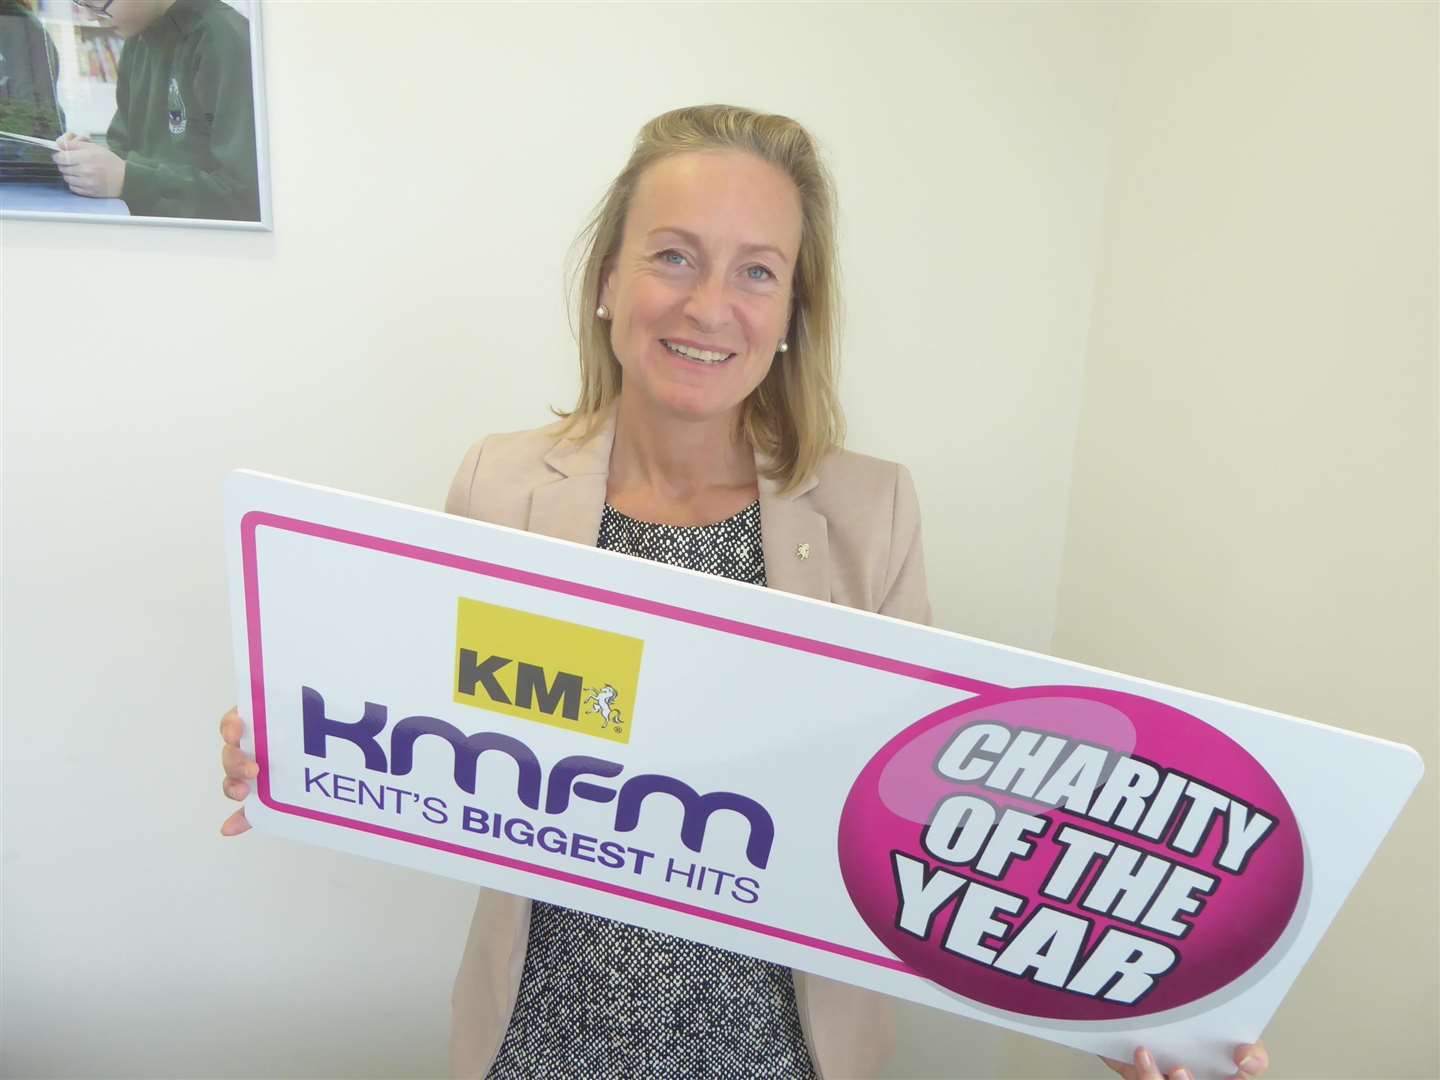 Geraldine Allinson, chairman of the KM Group, which supports Kent and Medway charities through media coverage and the KM Charity of the Year initiative.